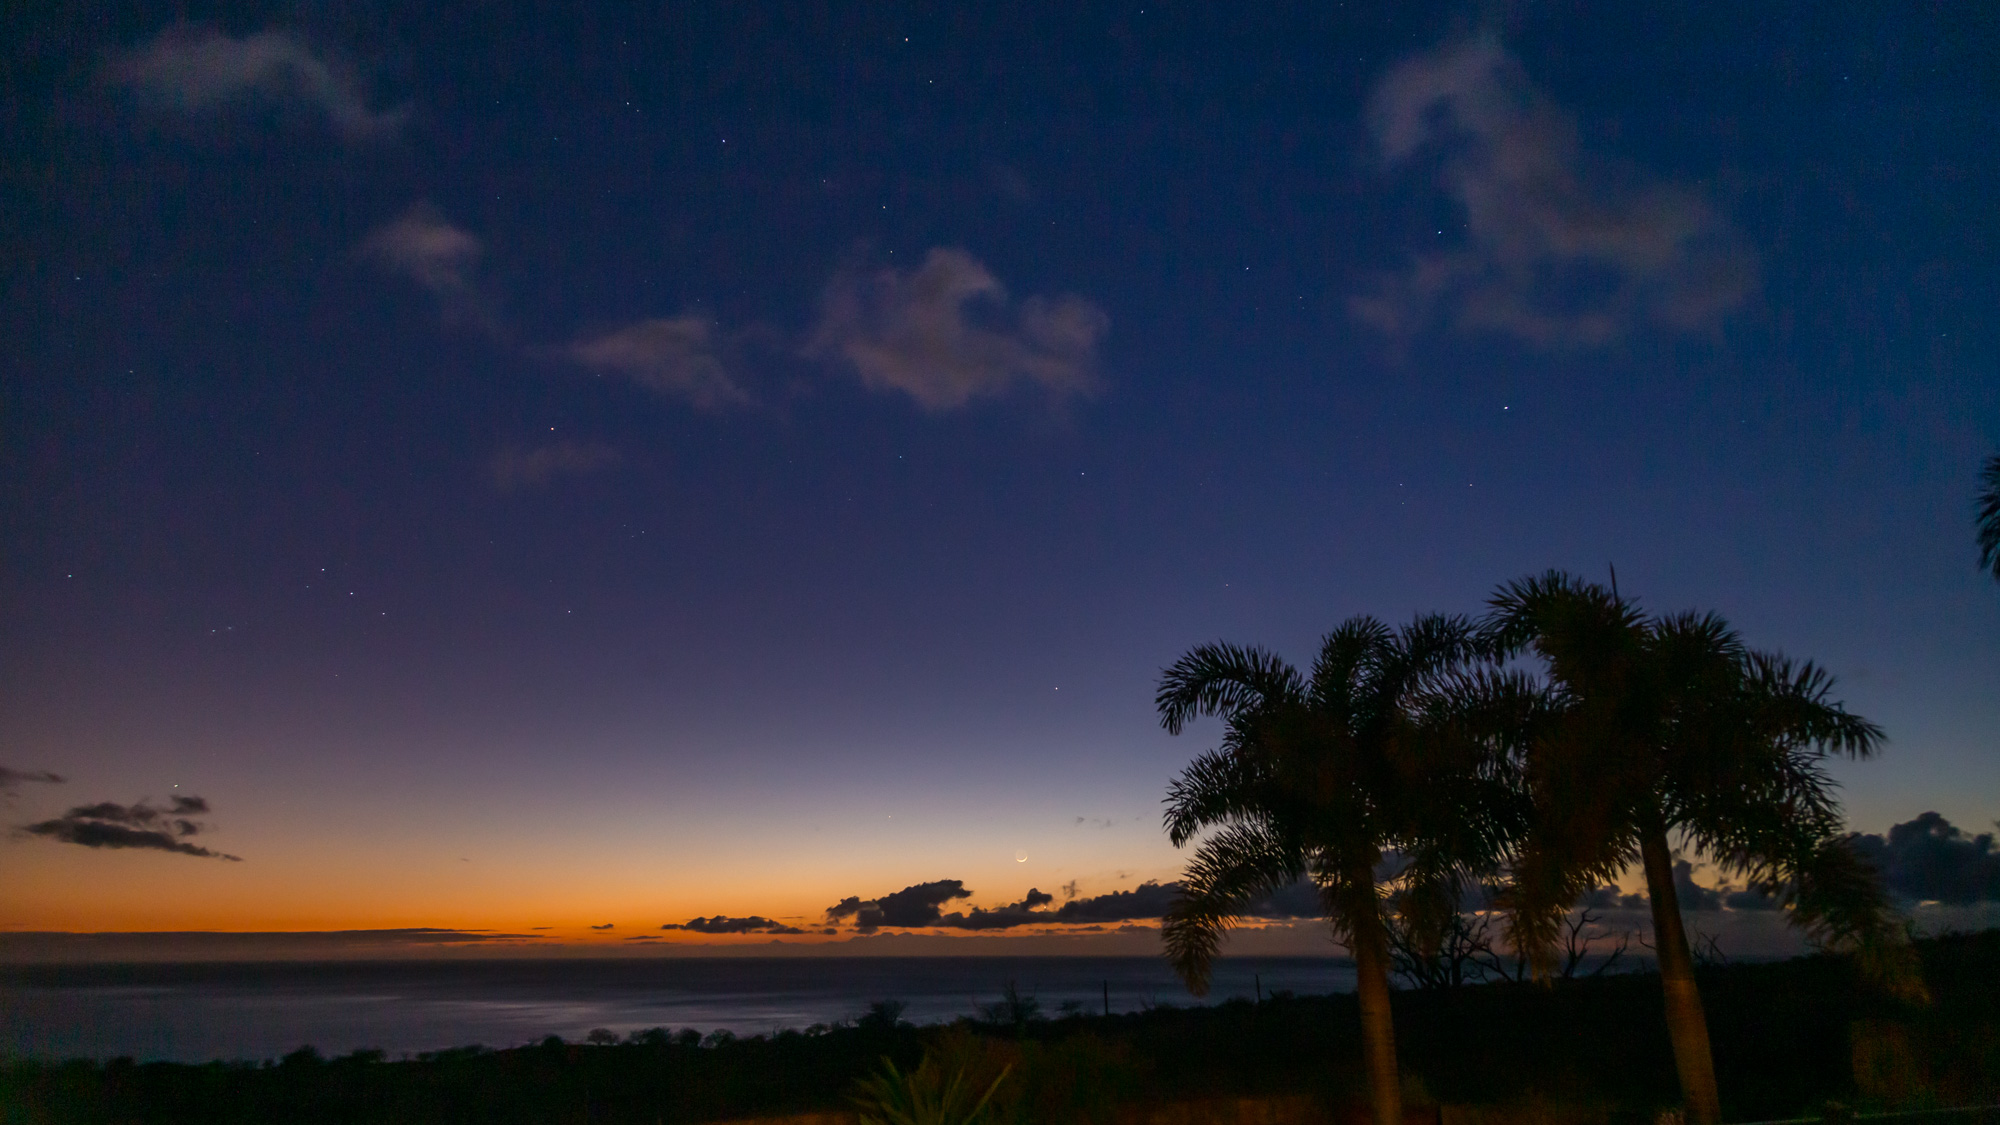 The crescent Moon setting over the Pacific ocean while Venus is visible peeking out between the clouds below the Moon.  Mercury (above and slightly to the right of the Moon) and Mars (near the top of the frame) are also visible.